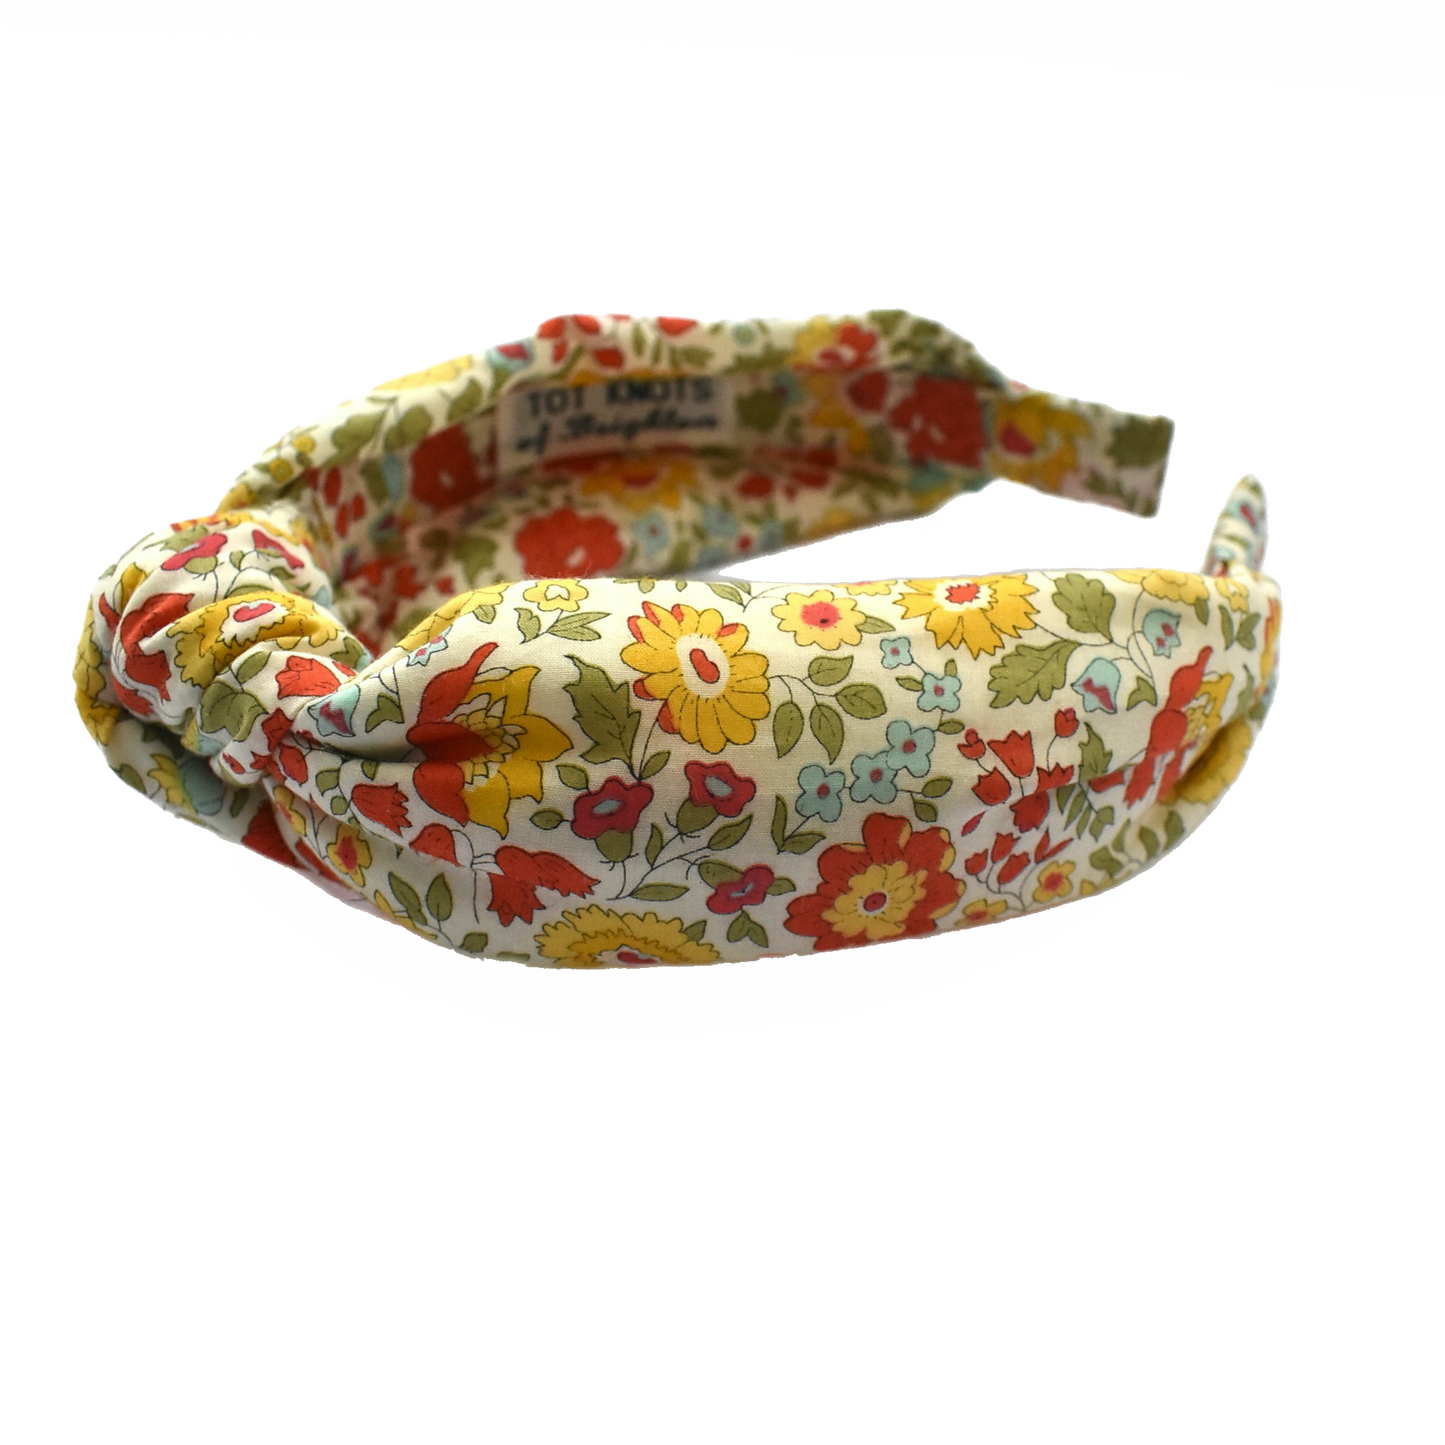 Classic Knot head band - Liberty of London D'anjo Yellow Floral print